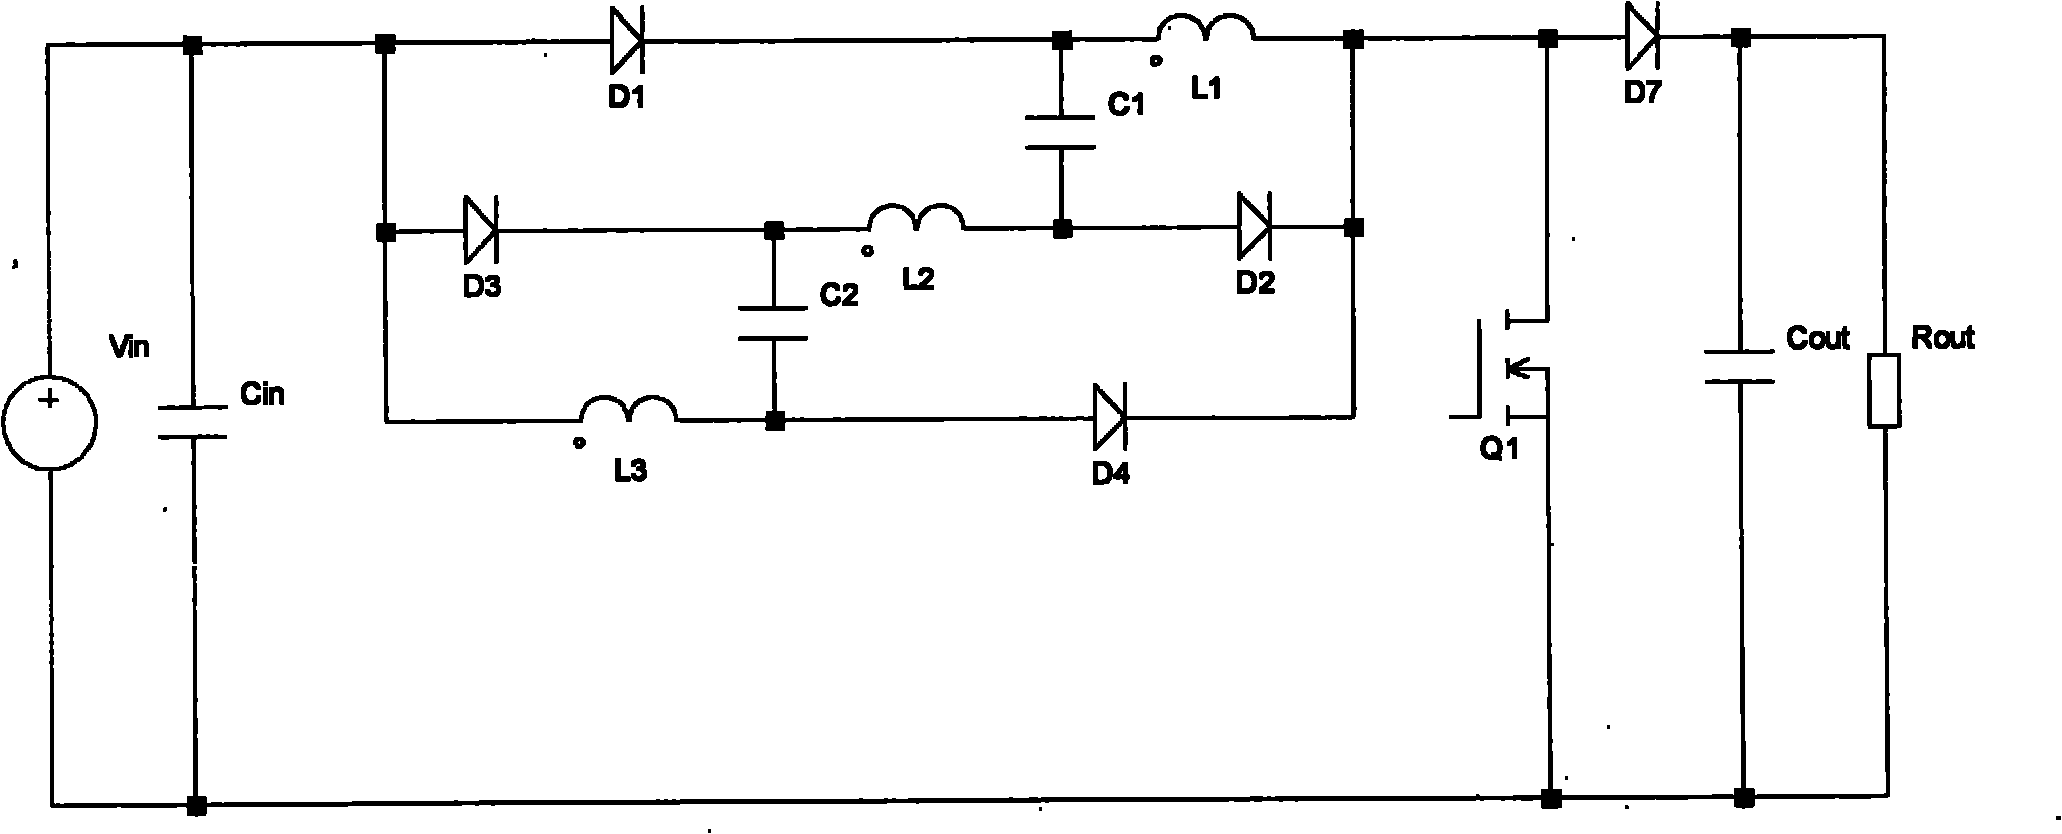 High-gain boost converter with inductance-capacitance switching network